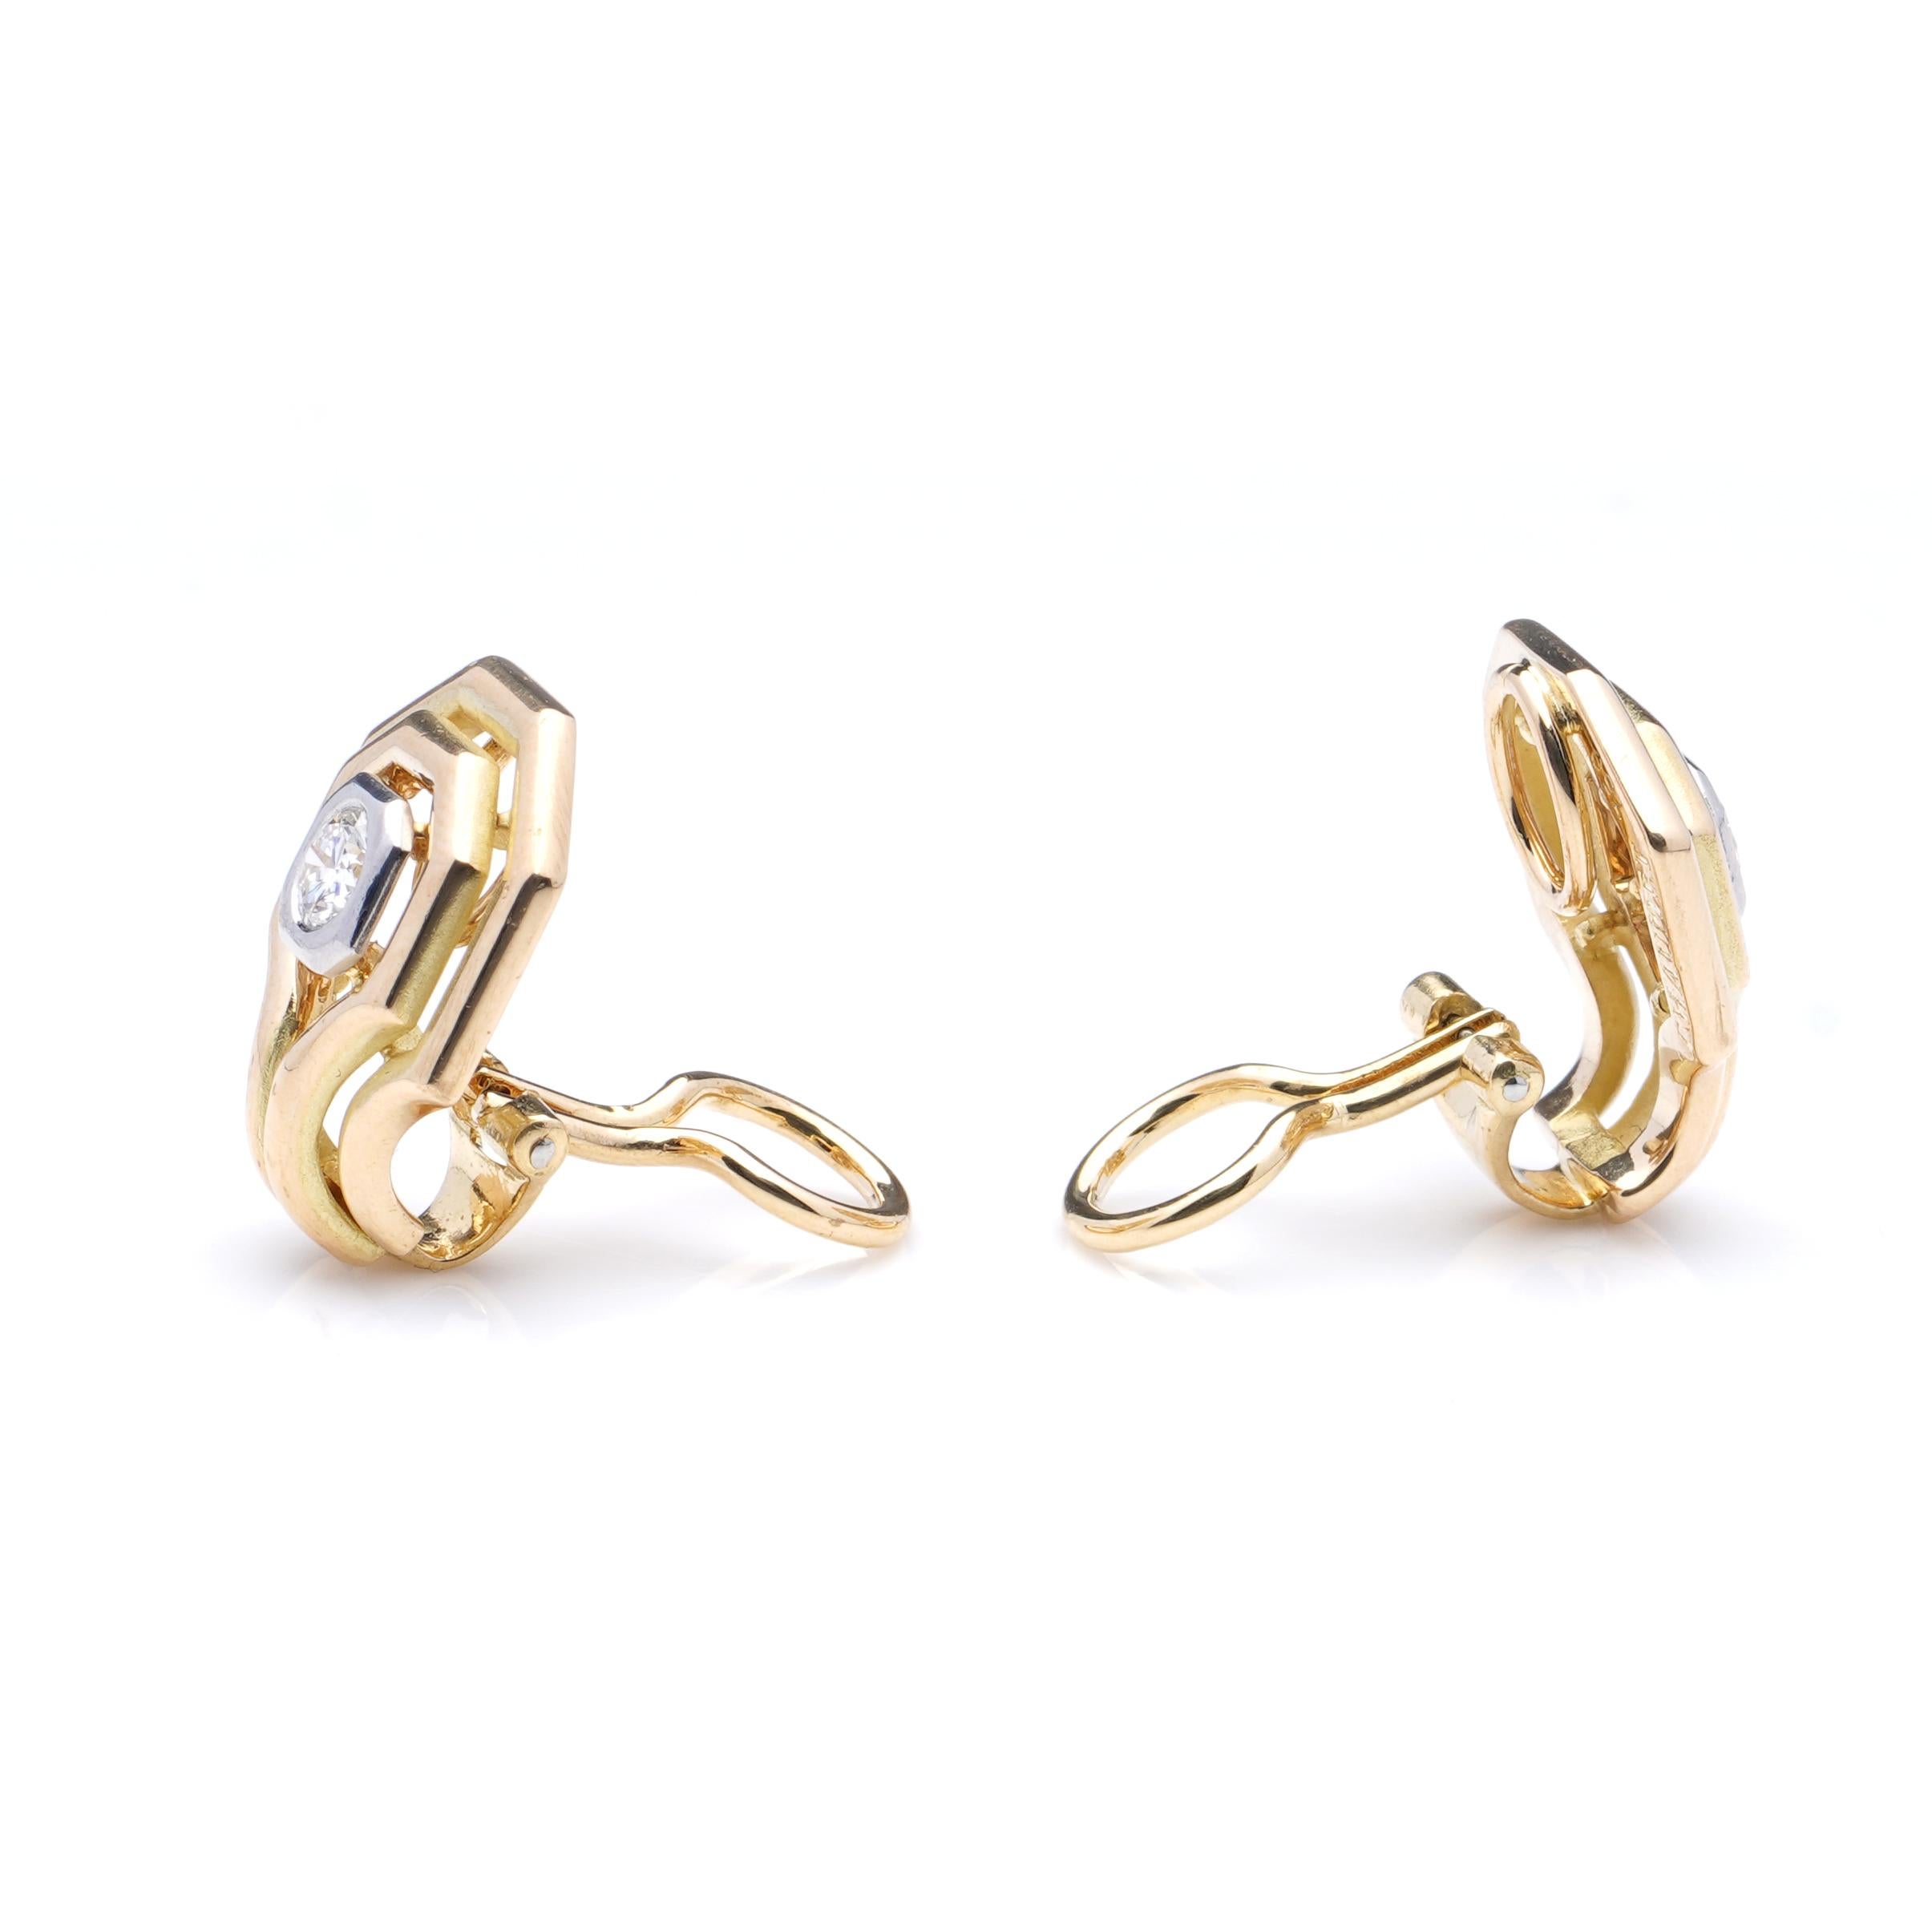 Brilliant Cut Chaumet ladies 18kt yellow gold clip-on earrings set with stunning diamonds. 